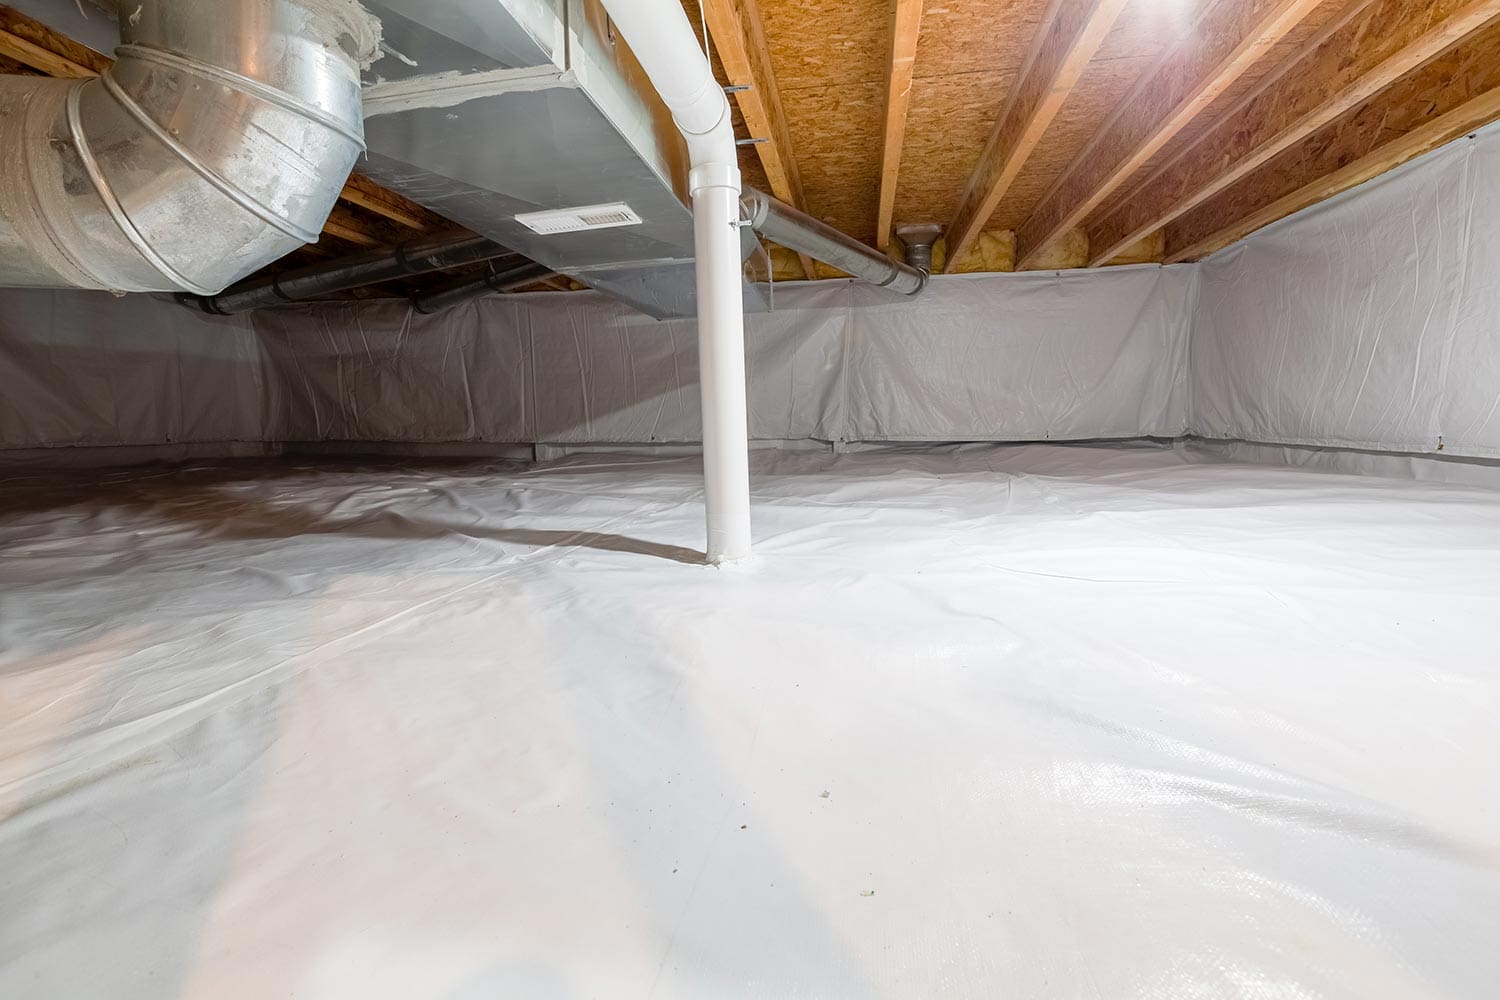 Crawl space fully encapsulated with thermoregulatory blankets